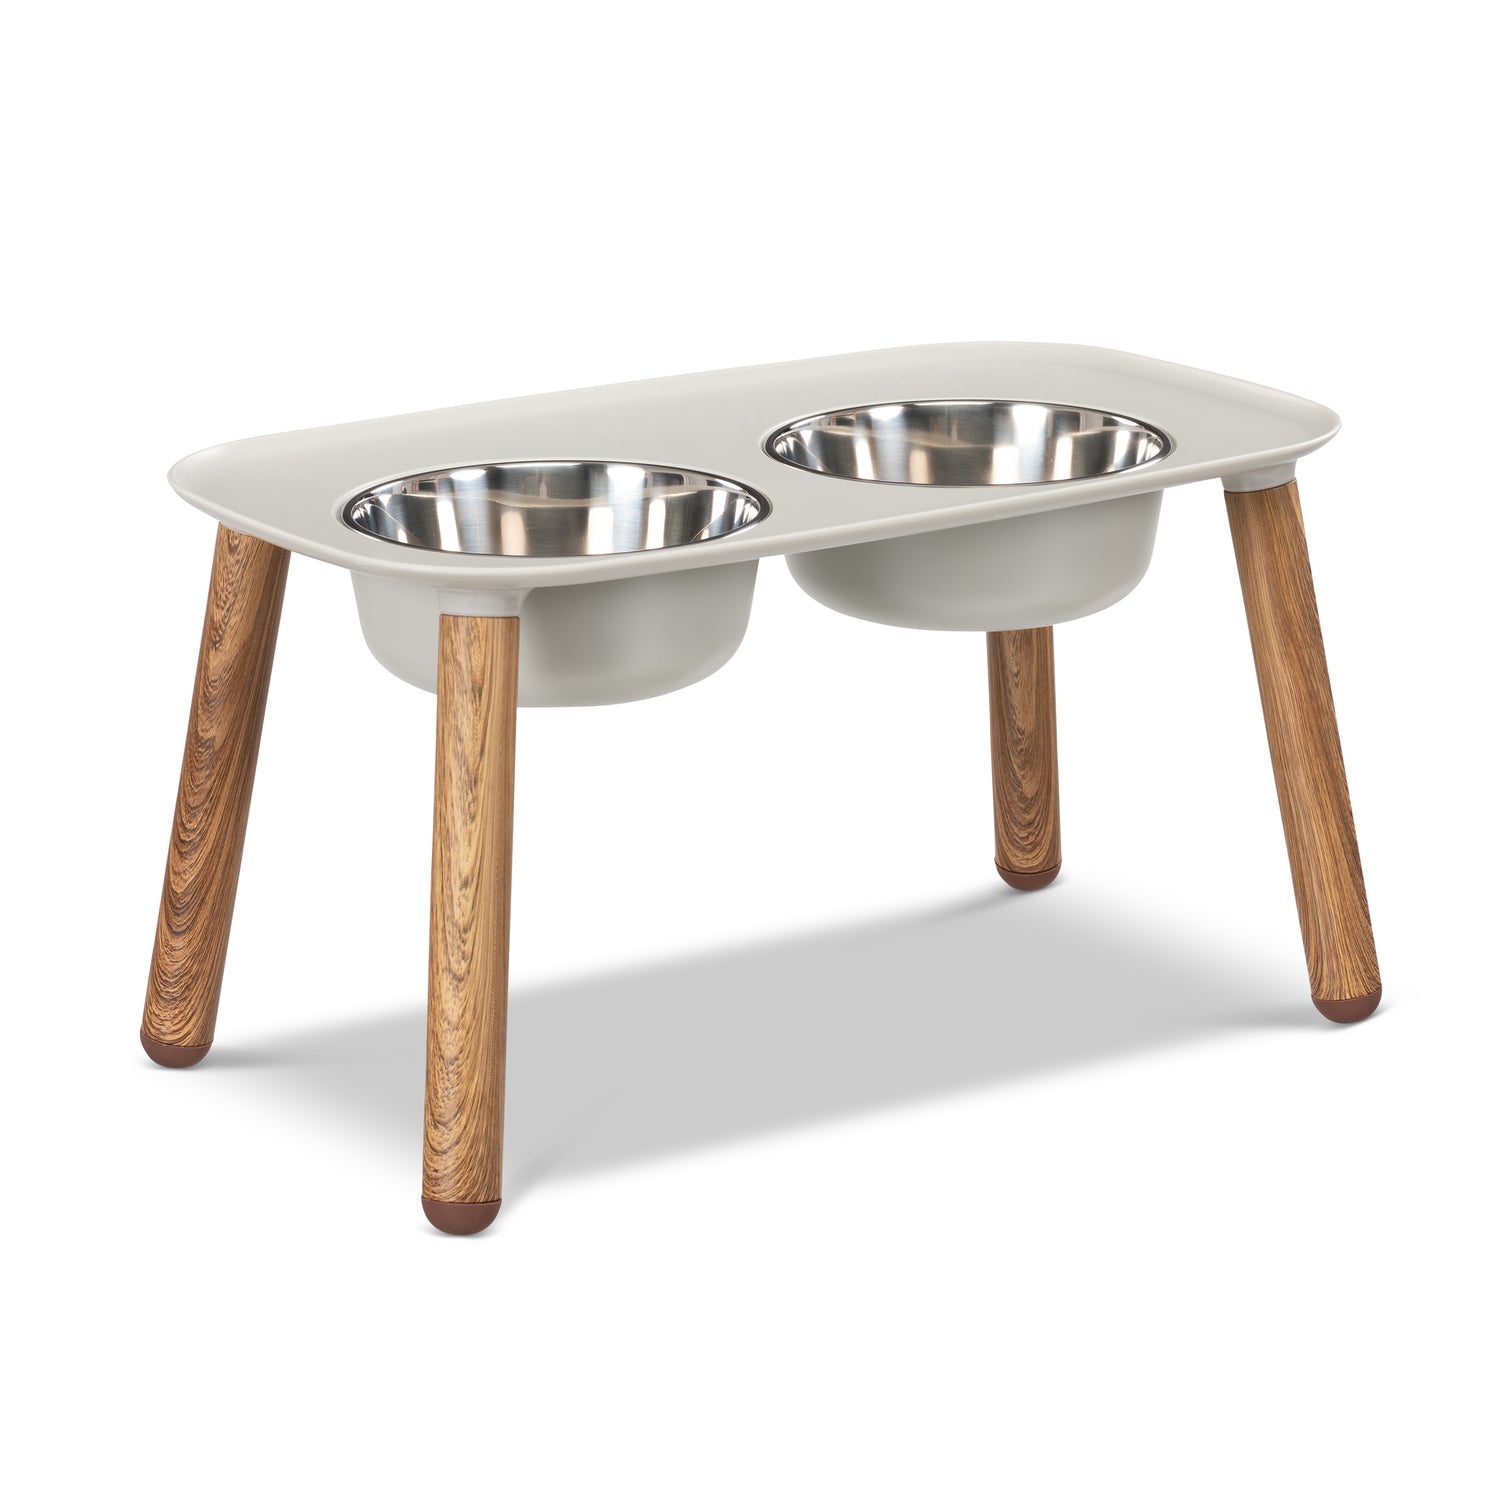 Light grey elevated double dog diner with 10 inch faux wood legs. 